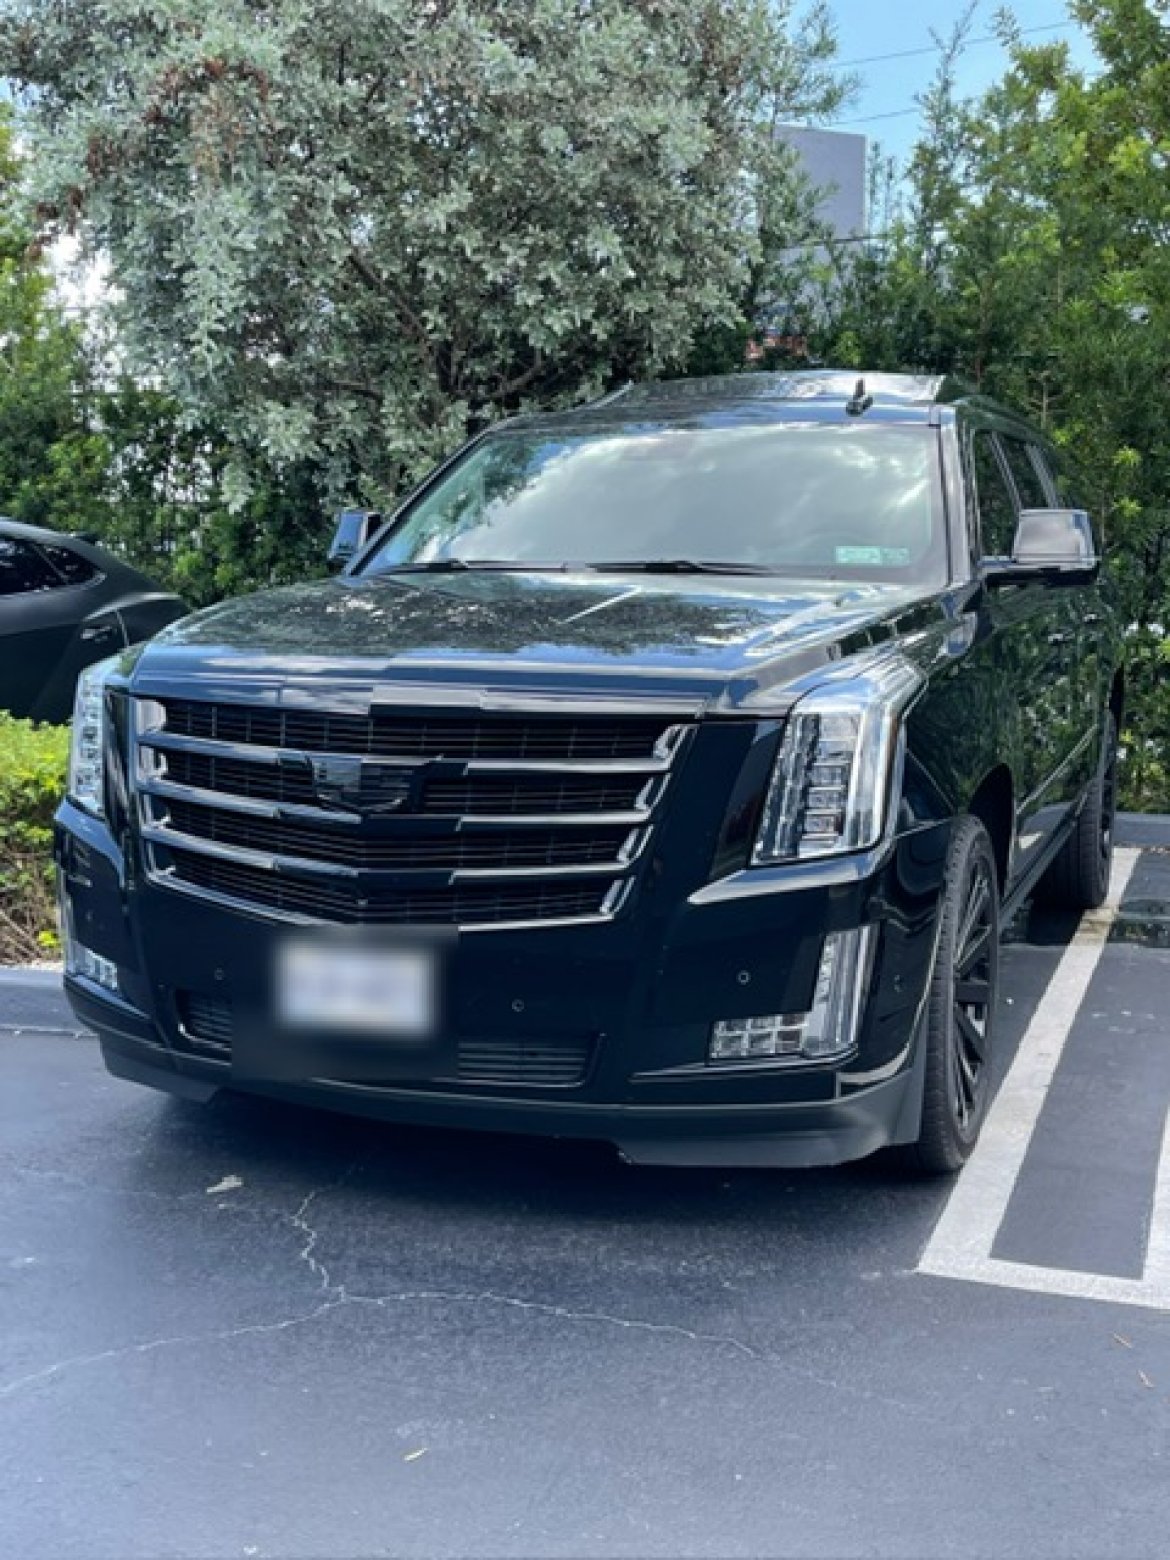 CEO SUV Mobile Office for sale: 2020 Cadillac Escalade ESV by QC Armor by Quality Coachworks